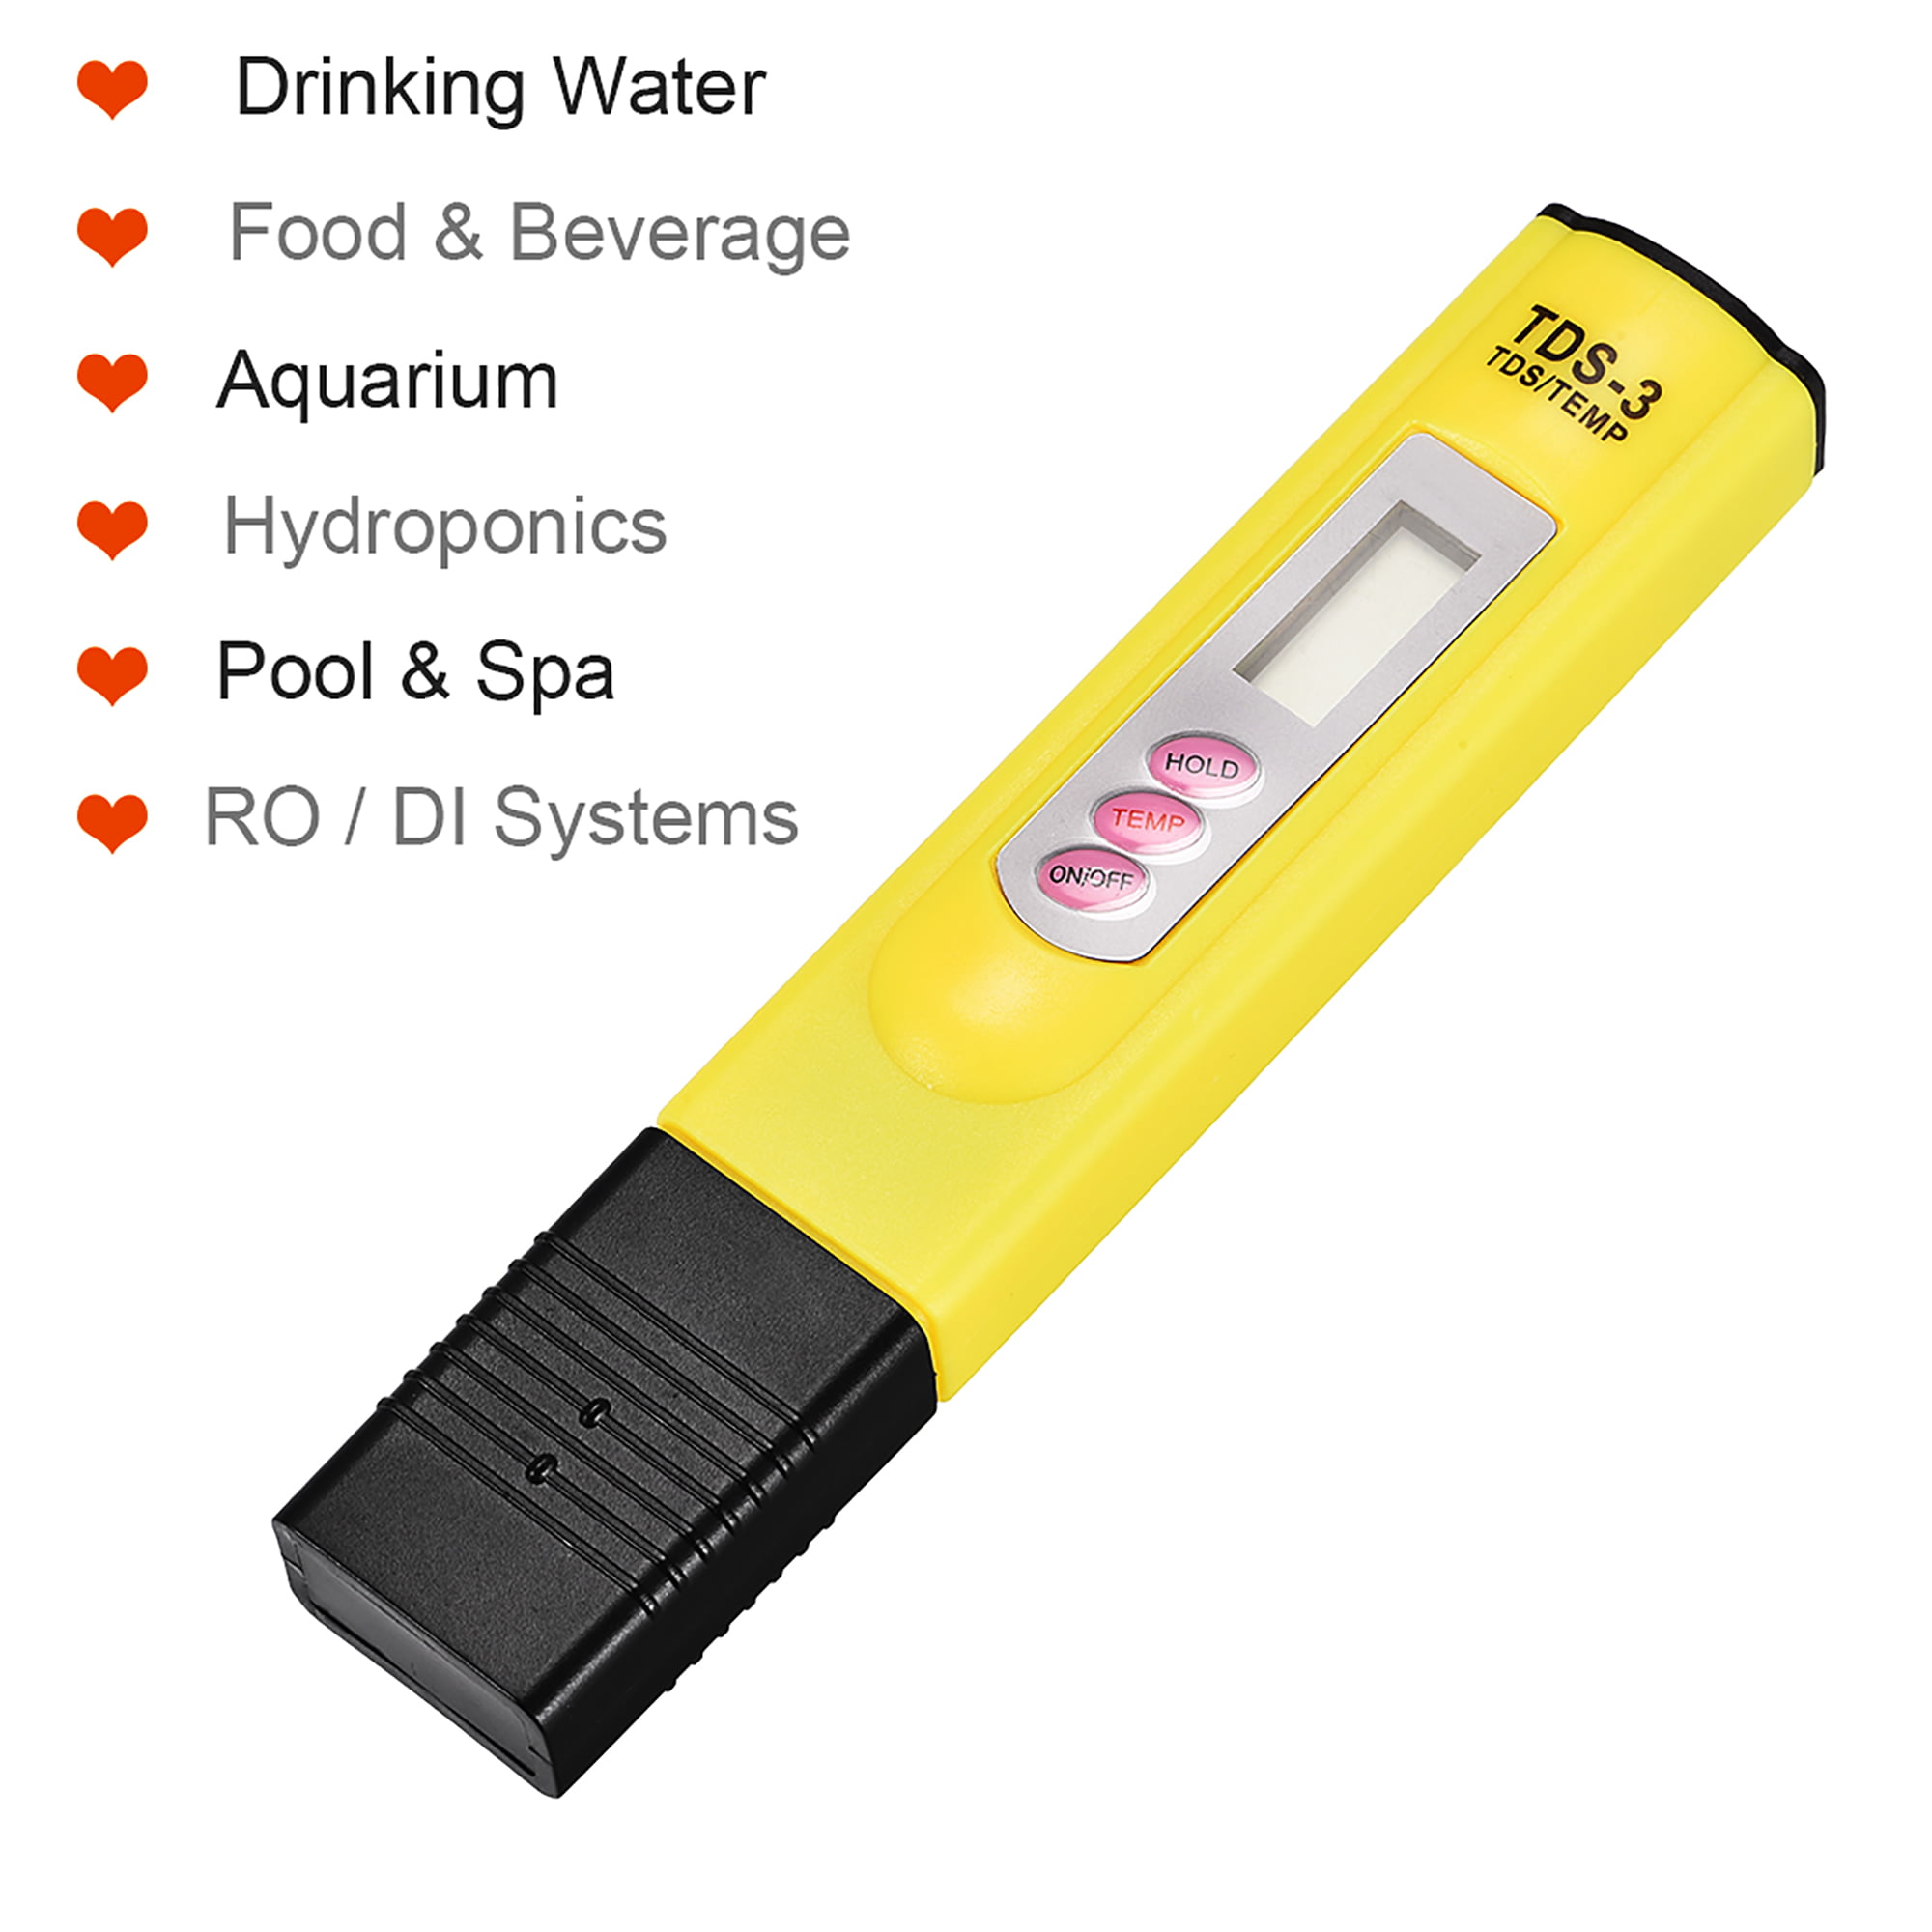 TDS 3 PPM Conductivity Meter for Water Aquarium Pool w Leather Case Yellow 